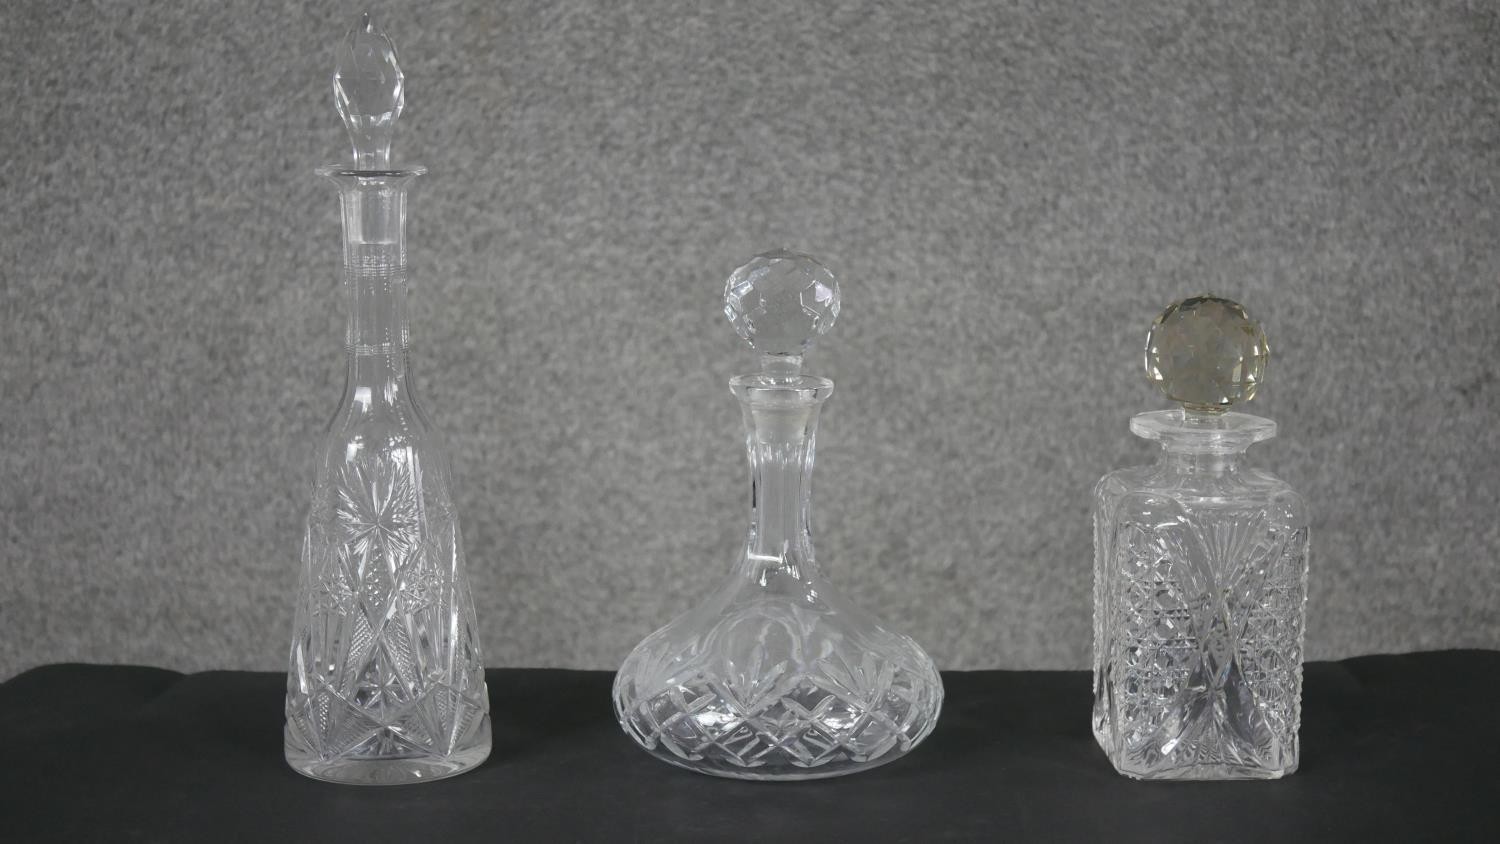 Three cut crystal decanters. One rectangular with a faceted ball stopper and the other two with